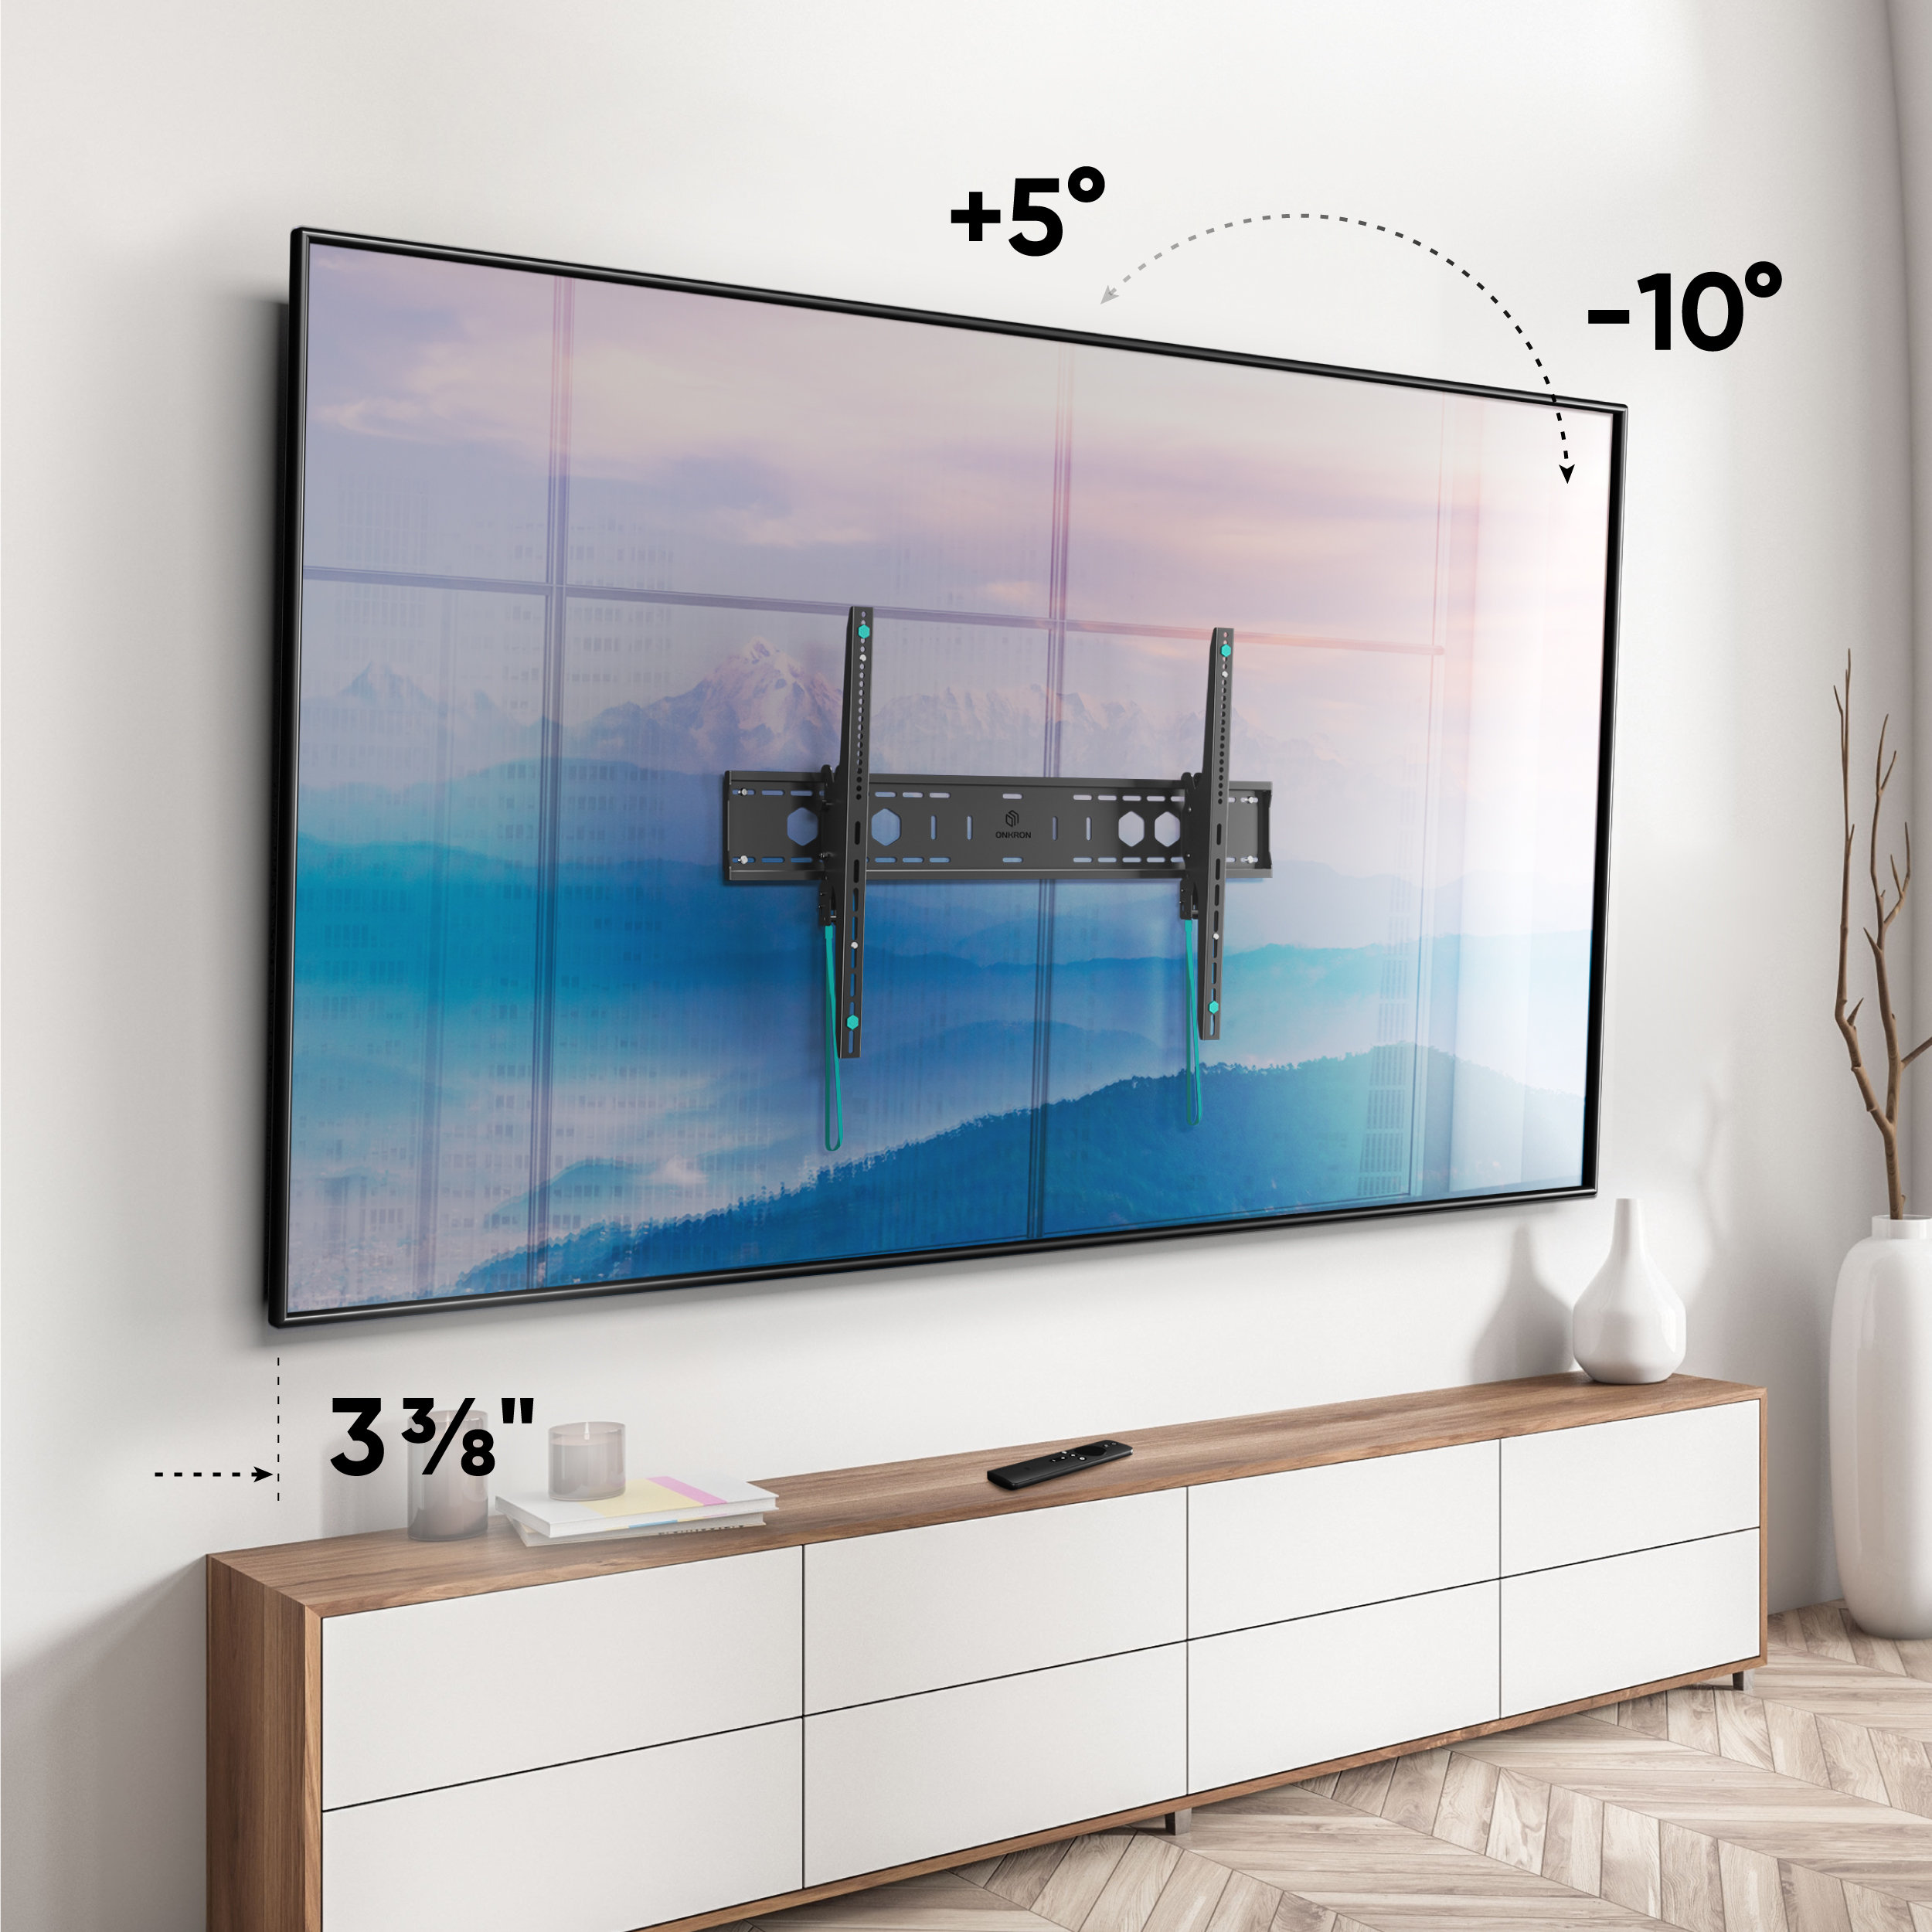 How to mount a TV on the wall?